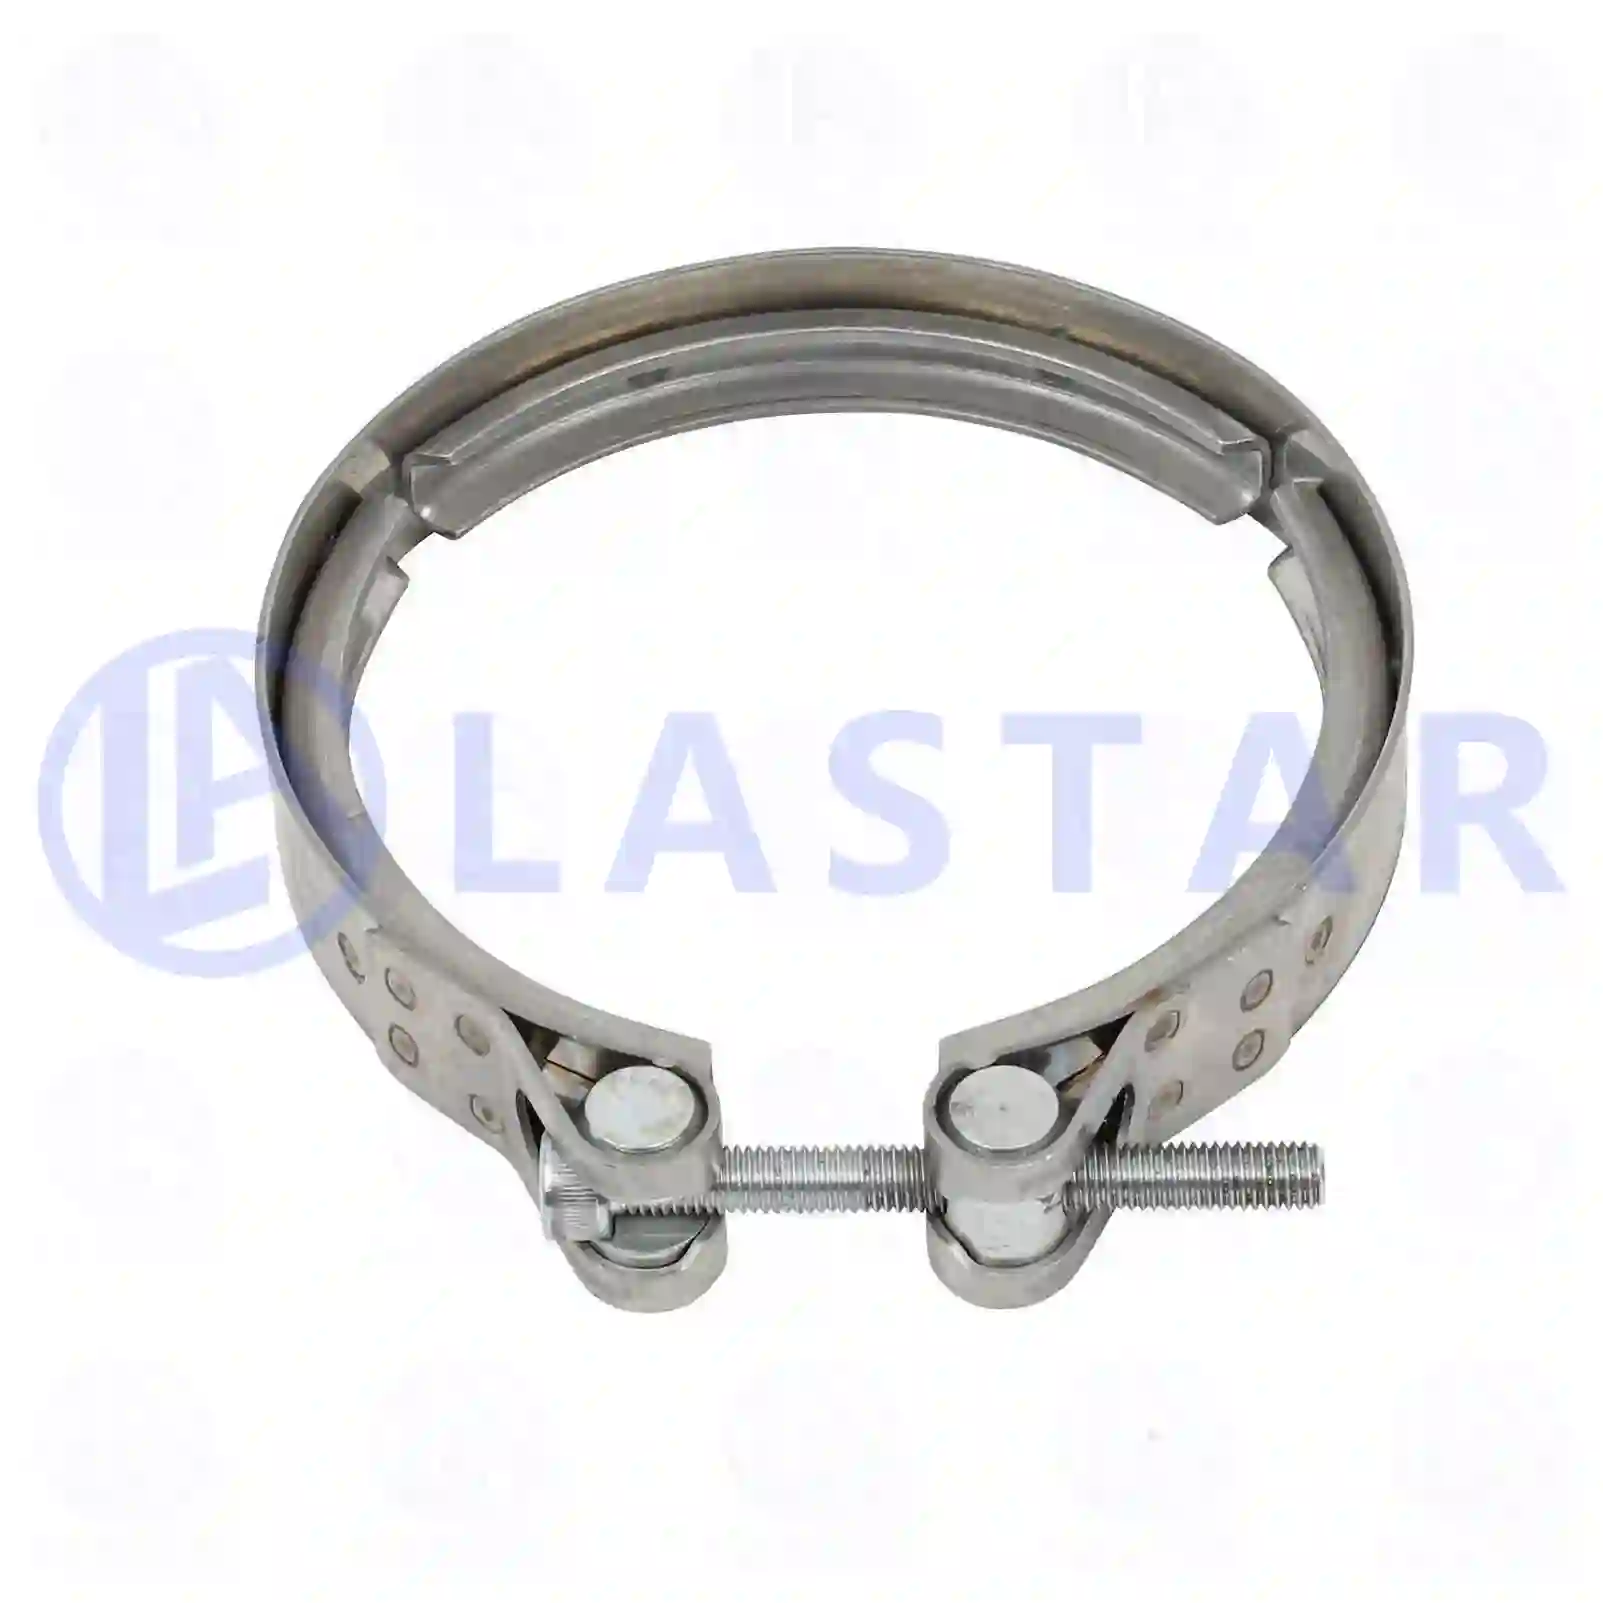 Clamp, 77706988, 06674190006, 1371089, 1387136, 1422474, 1863831, ZG10250-0008 ||  77706988 Lastar Spare Part | Truck Spare Parts, Auotomotive Spare Parts Clamp, 77706988, 06674190006, 1371089, 1387136, 1422474, 1863831, ZG10250-0008 ||  77706988 Lastar Spare Part | Truck Spare Parts, Auotomotive Spare Parts